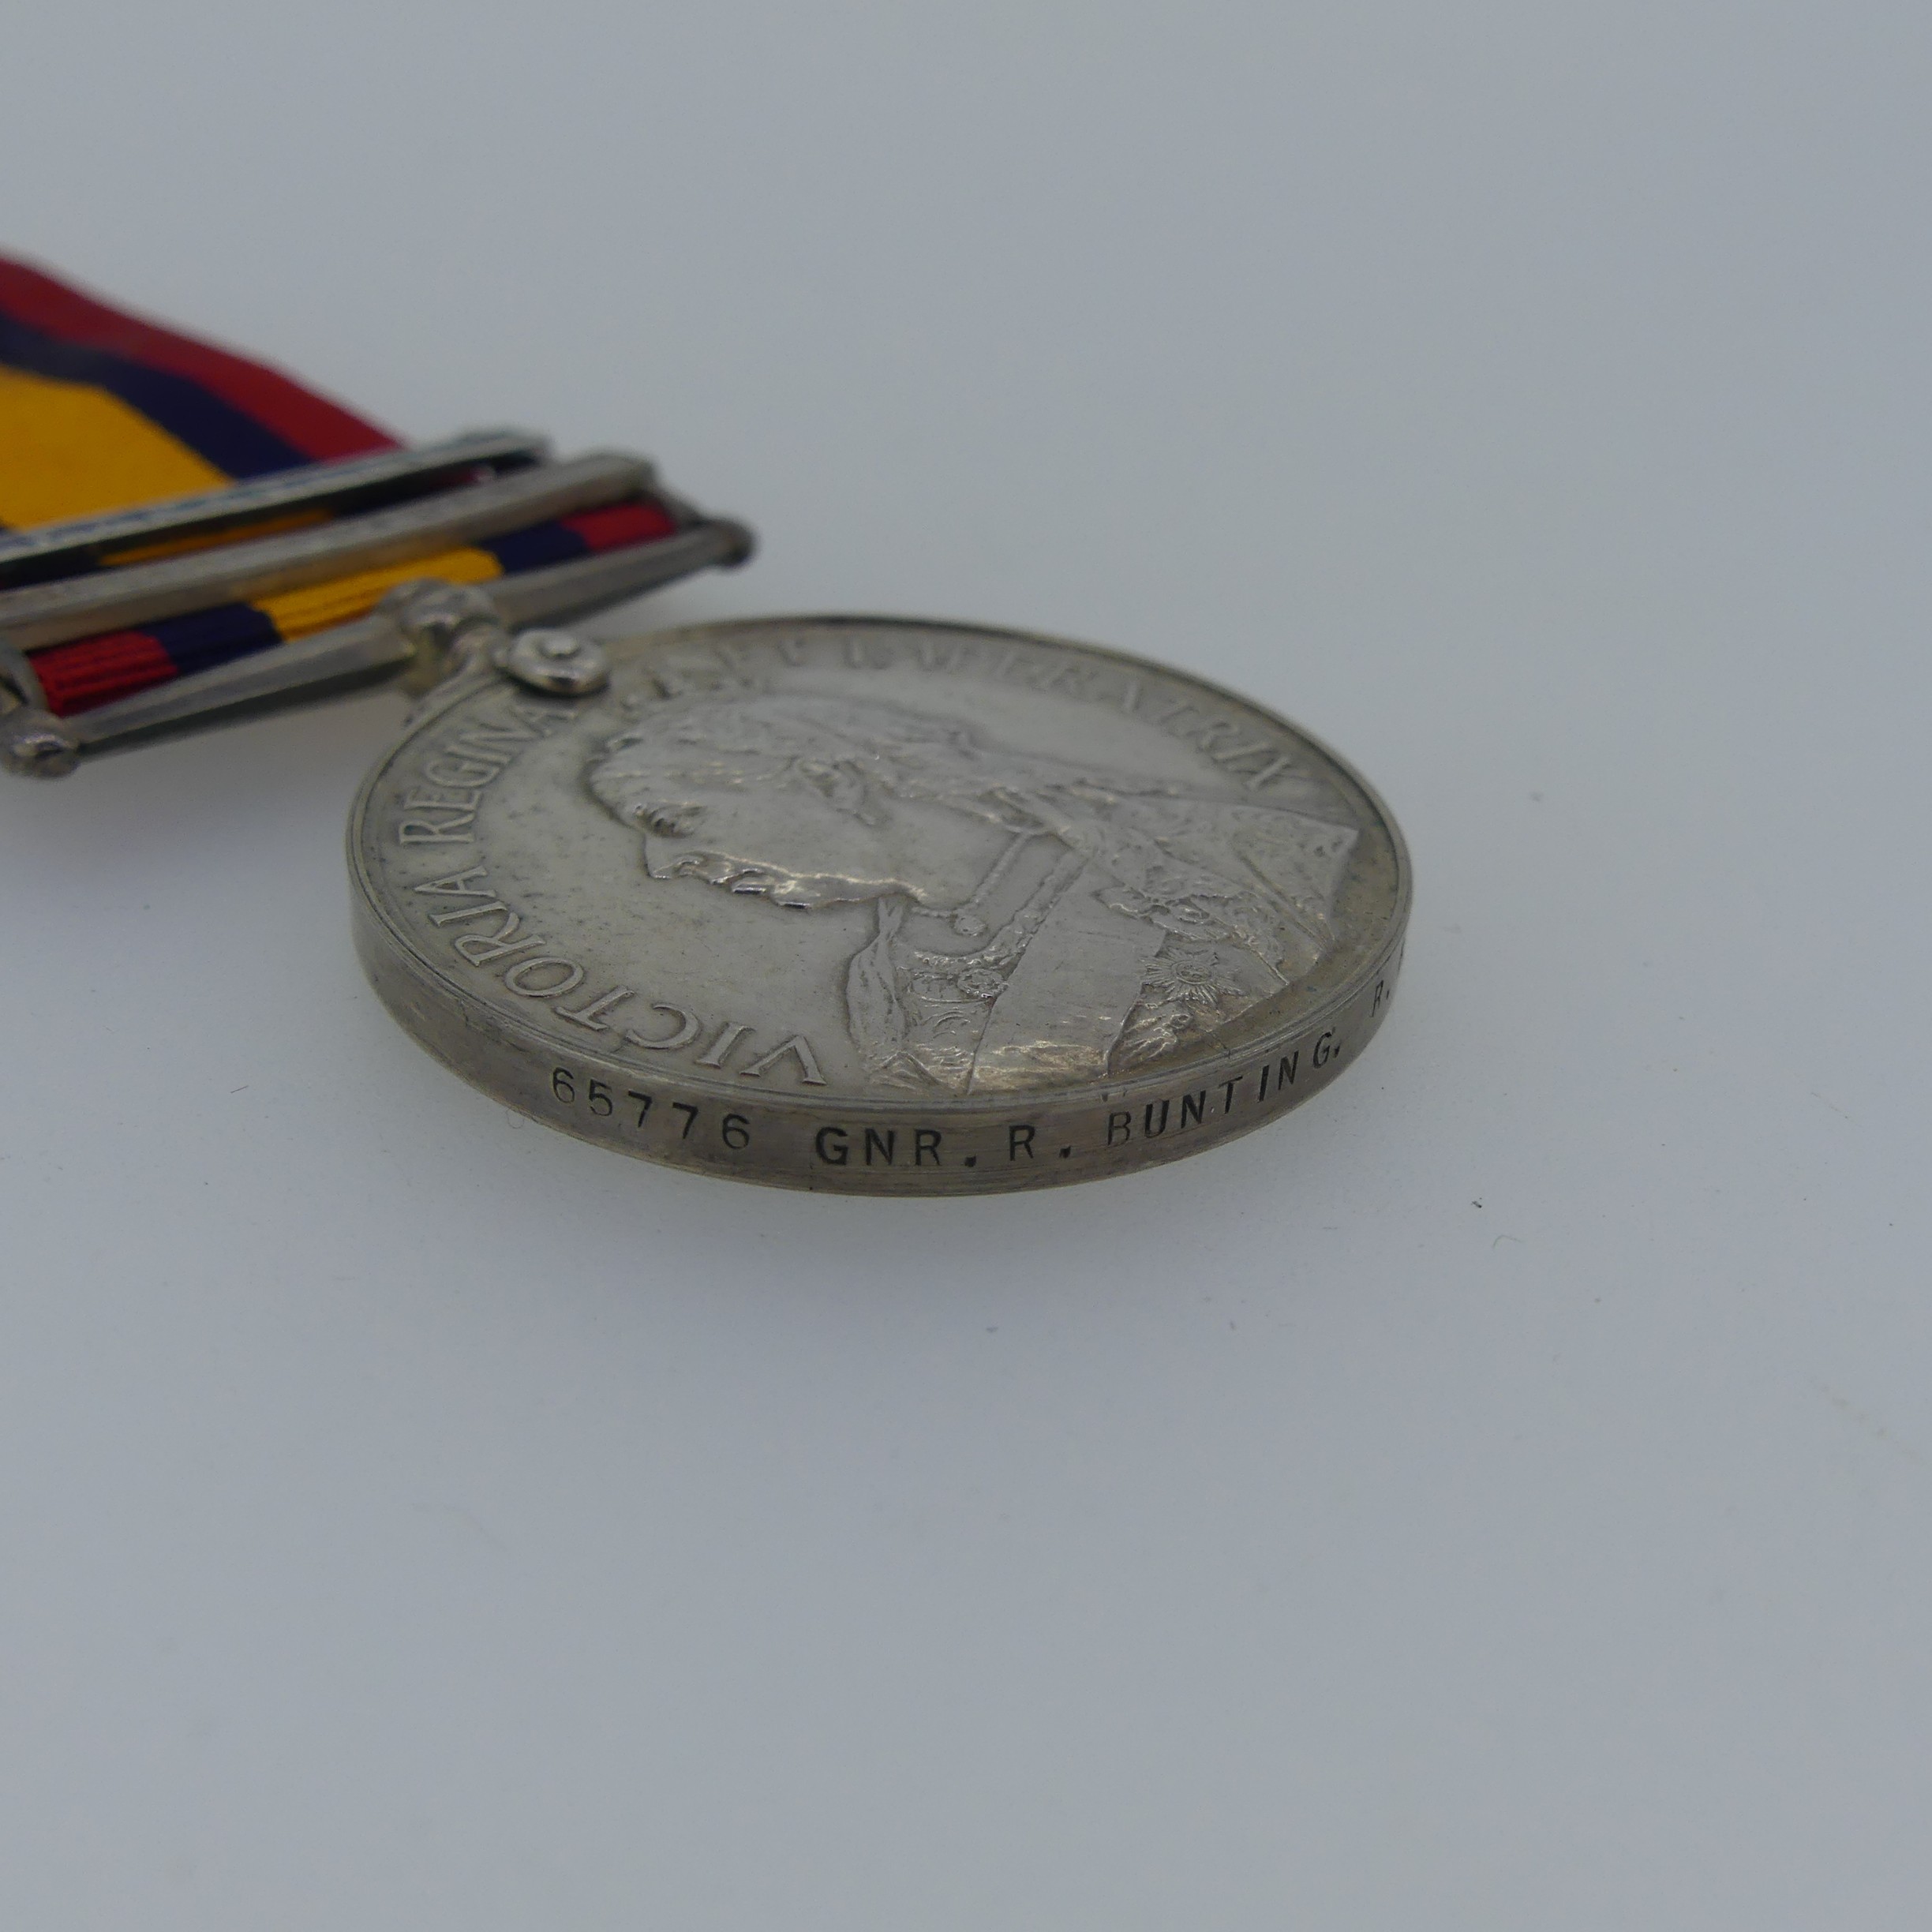 Queen's South Africa Medal (two clasps: Transvaal, Cape Colony) 65776 Gnr R. Bunting R.F.A. - Image 5 of 6